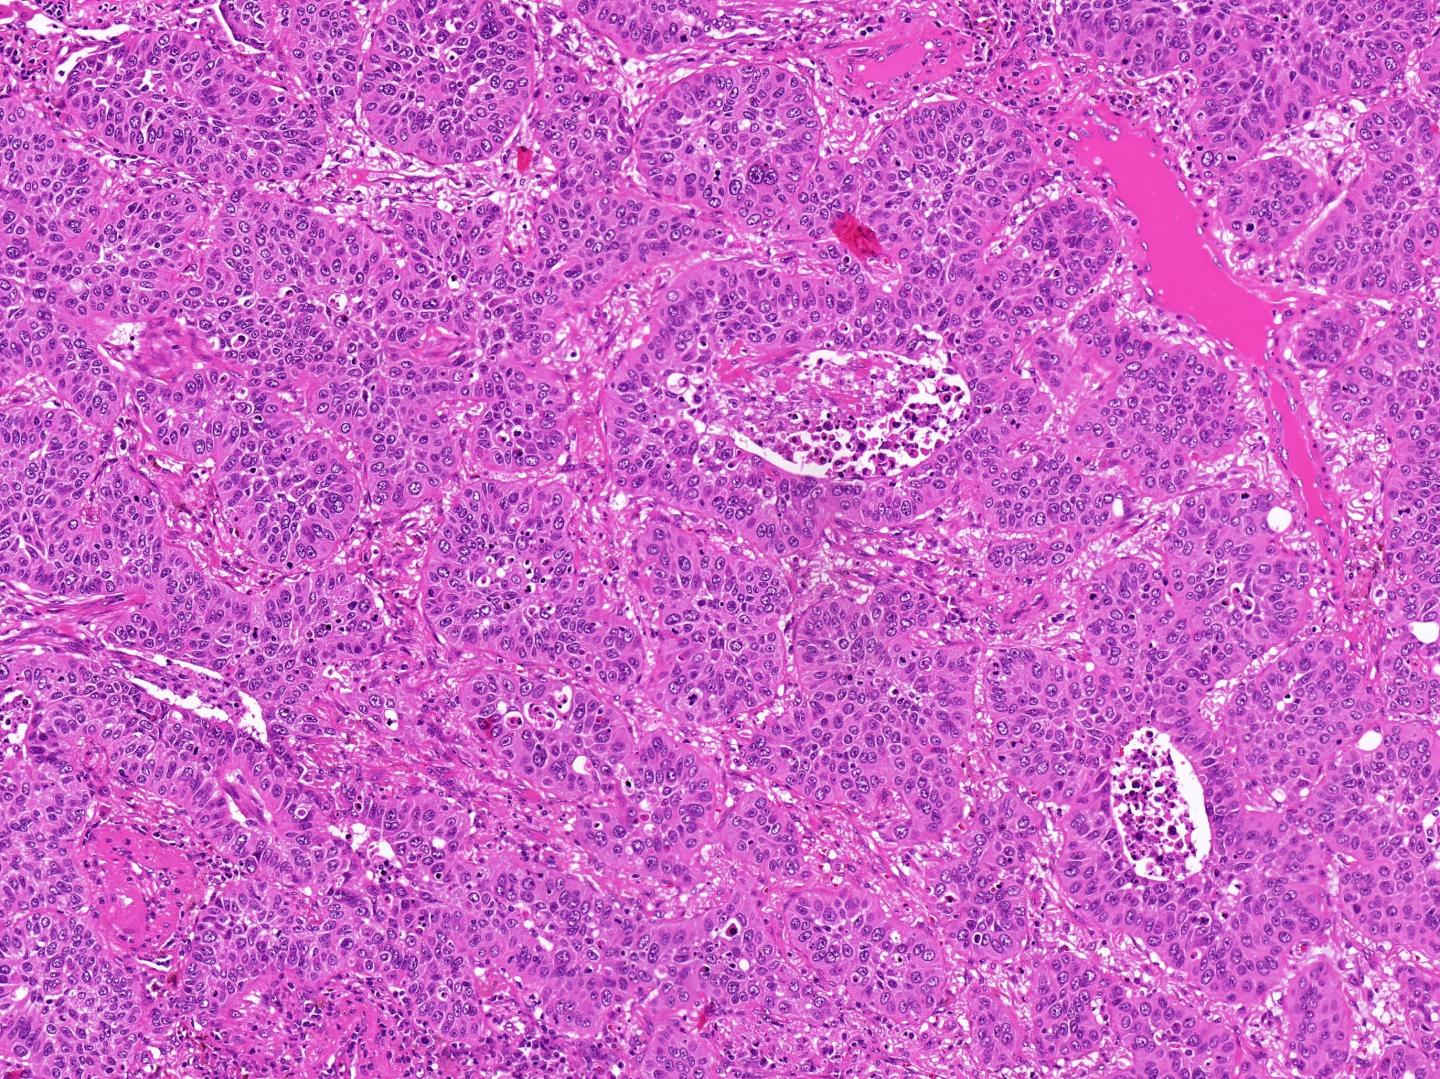 Histology Slide of a Primary Lung Cancer